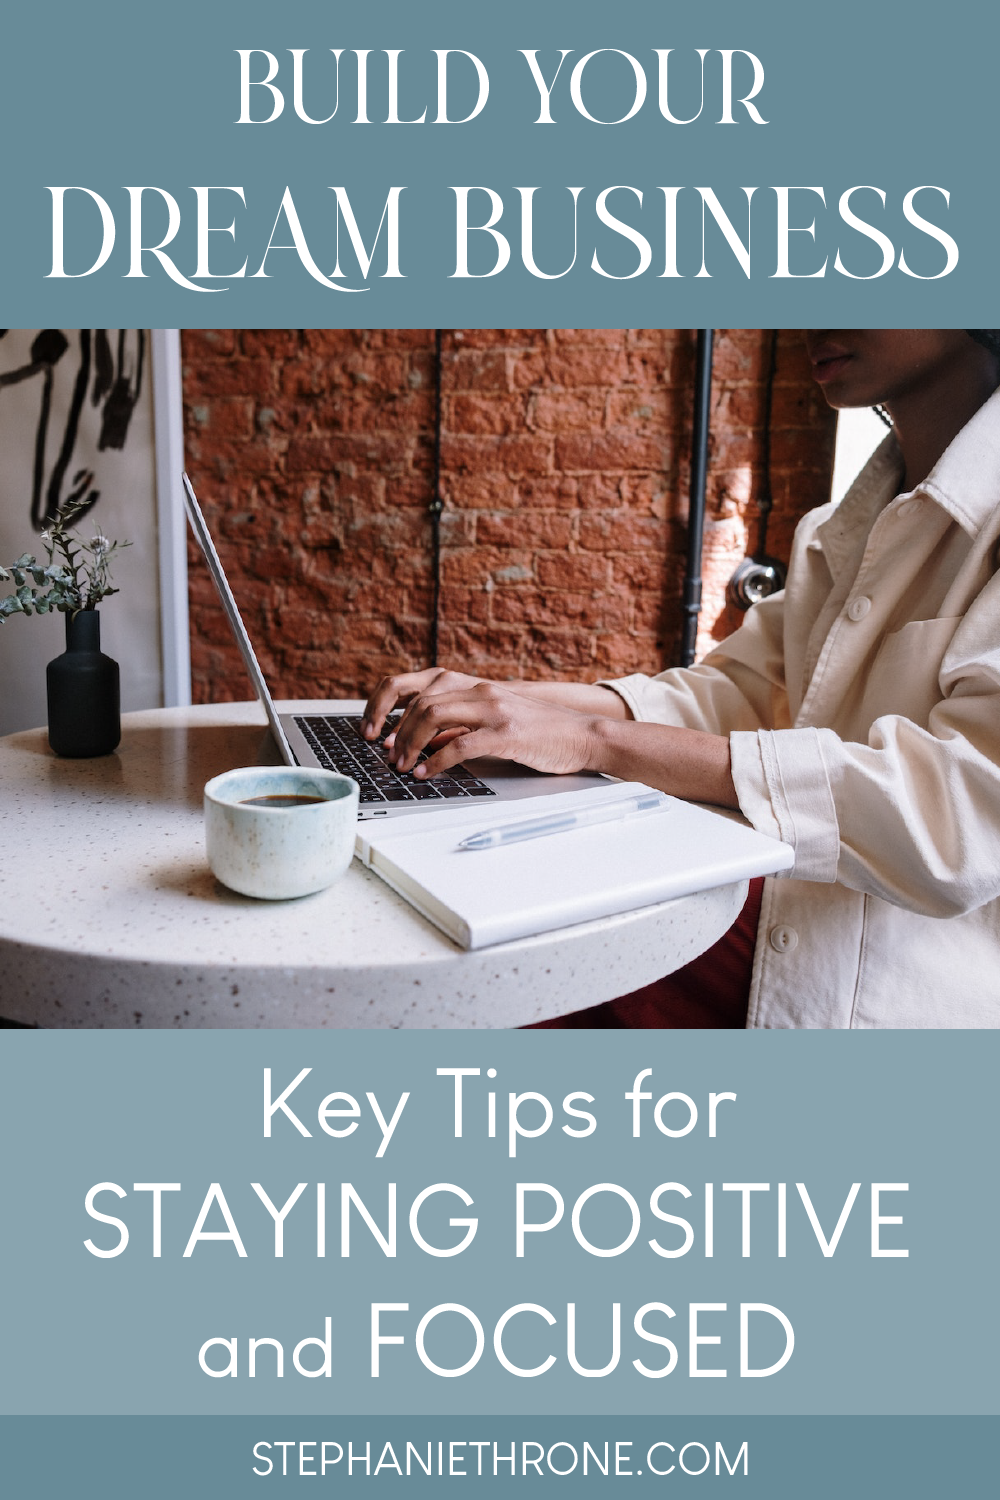 Key Tips to Stay Positive and Focu